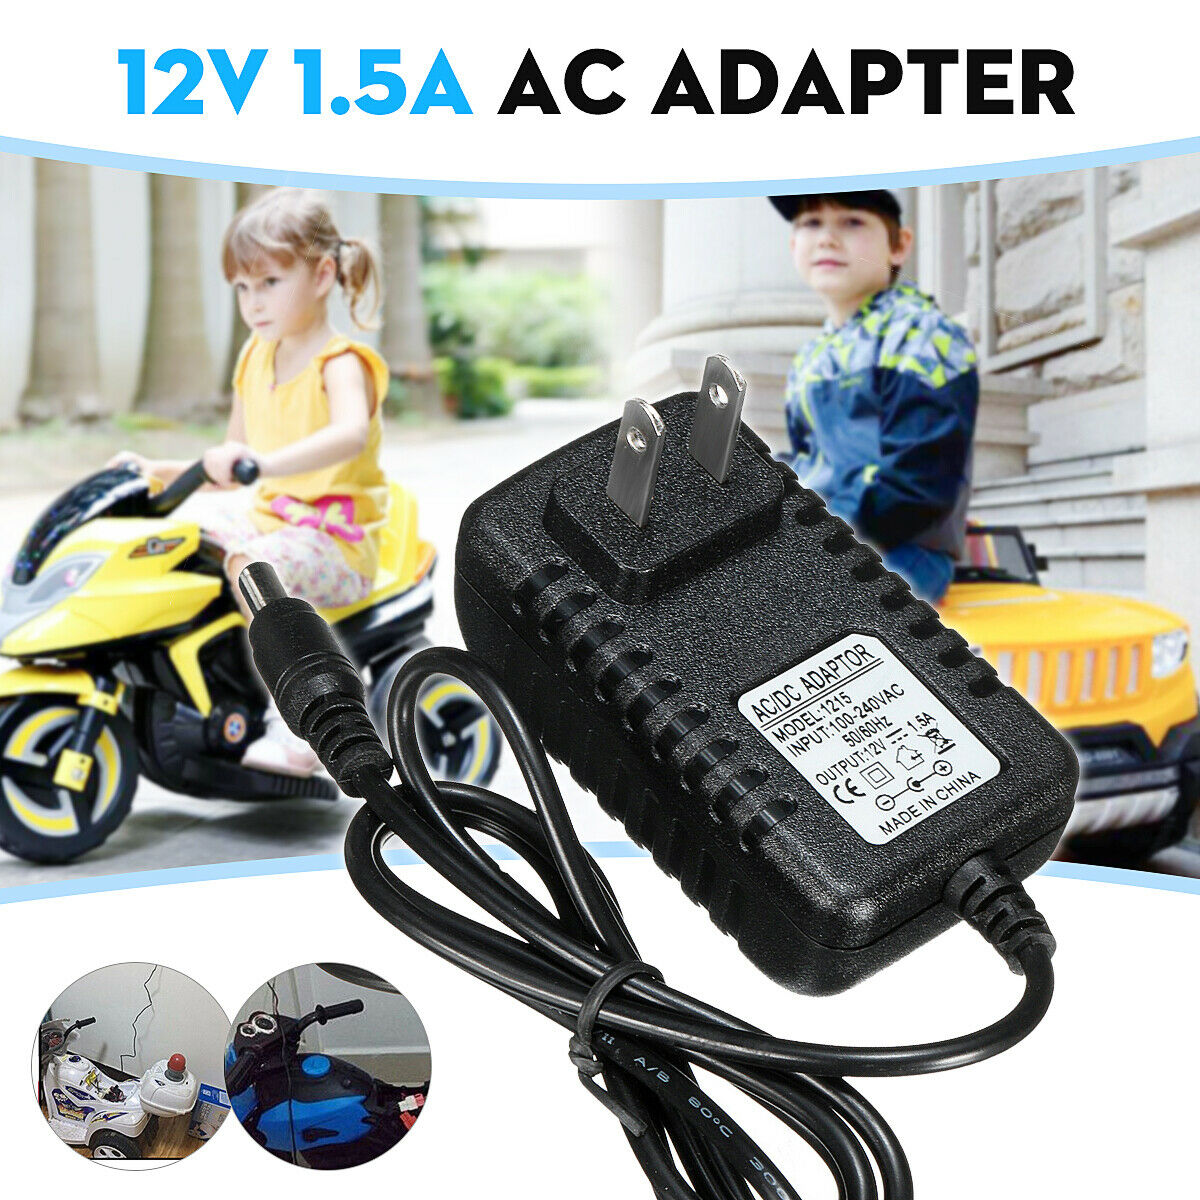 12V 1A Battery Charger Adapter For Kids ATV Quad Ride On Cars Motorcycle AC/DC MPN: MEI8542749 Co